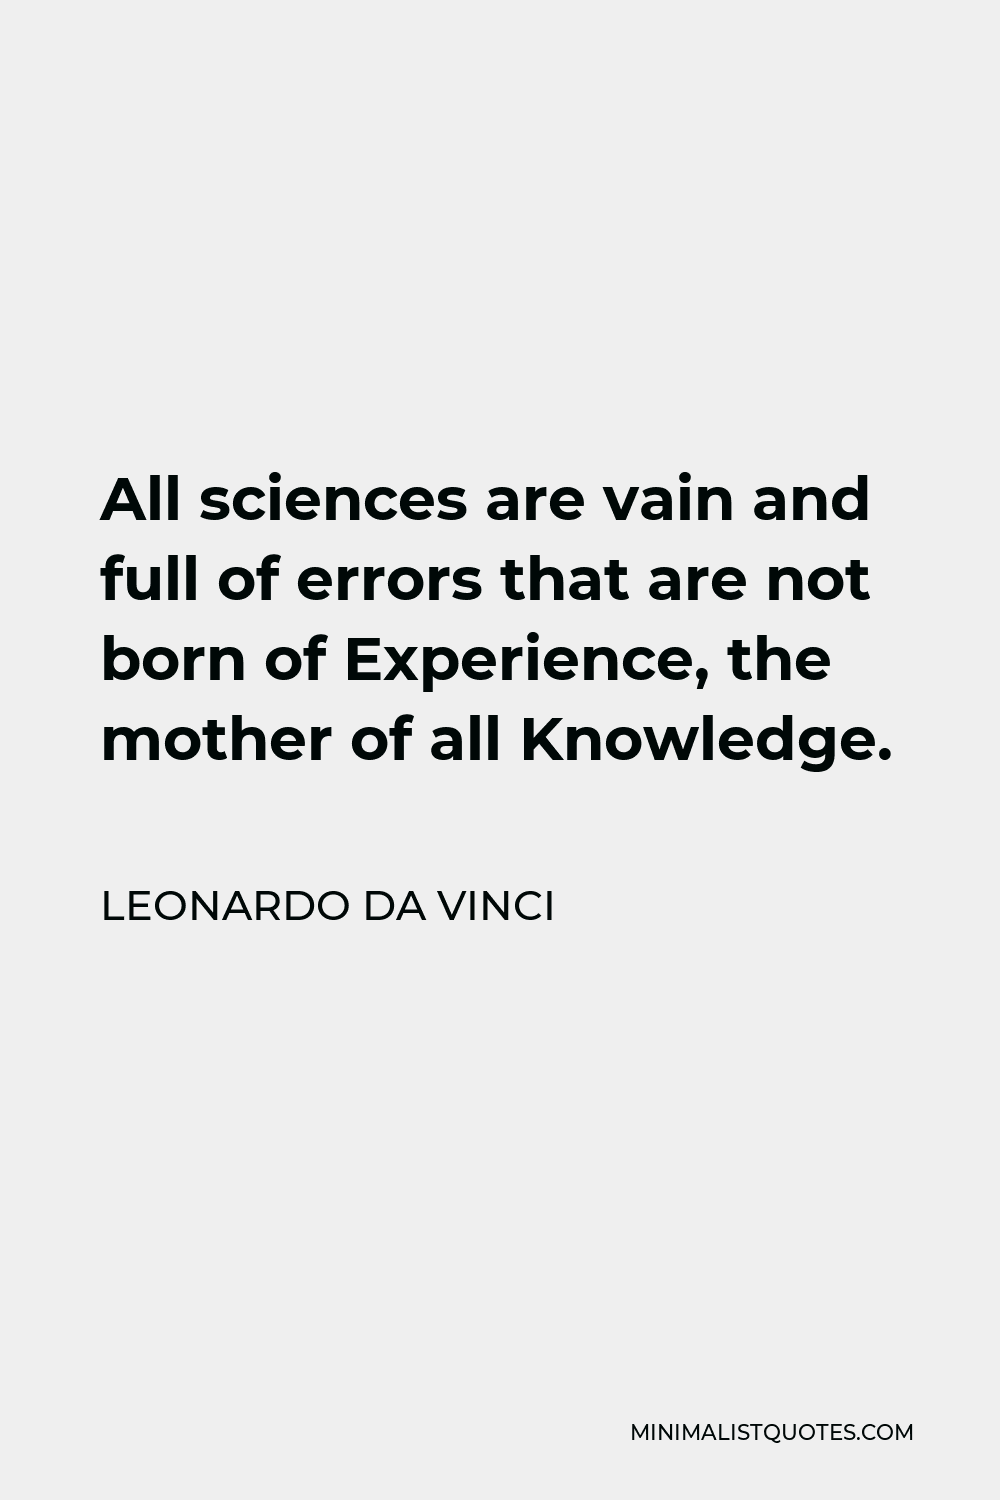 Leonardo da Vinci Quote - All sciences are vain and full of errors that are not born of Experience, the mother of all Knowledge.